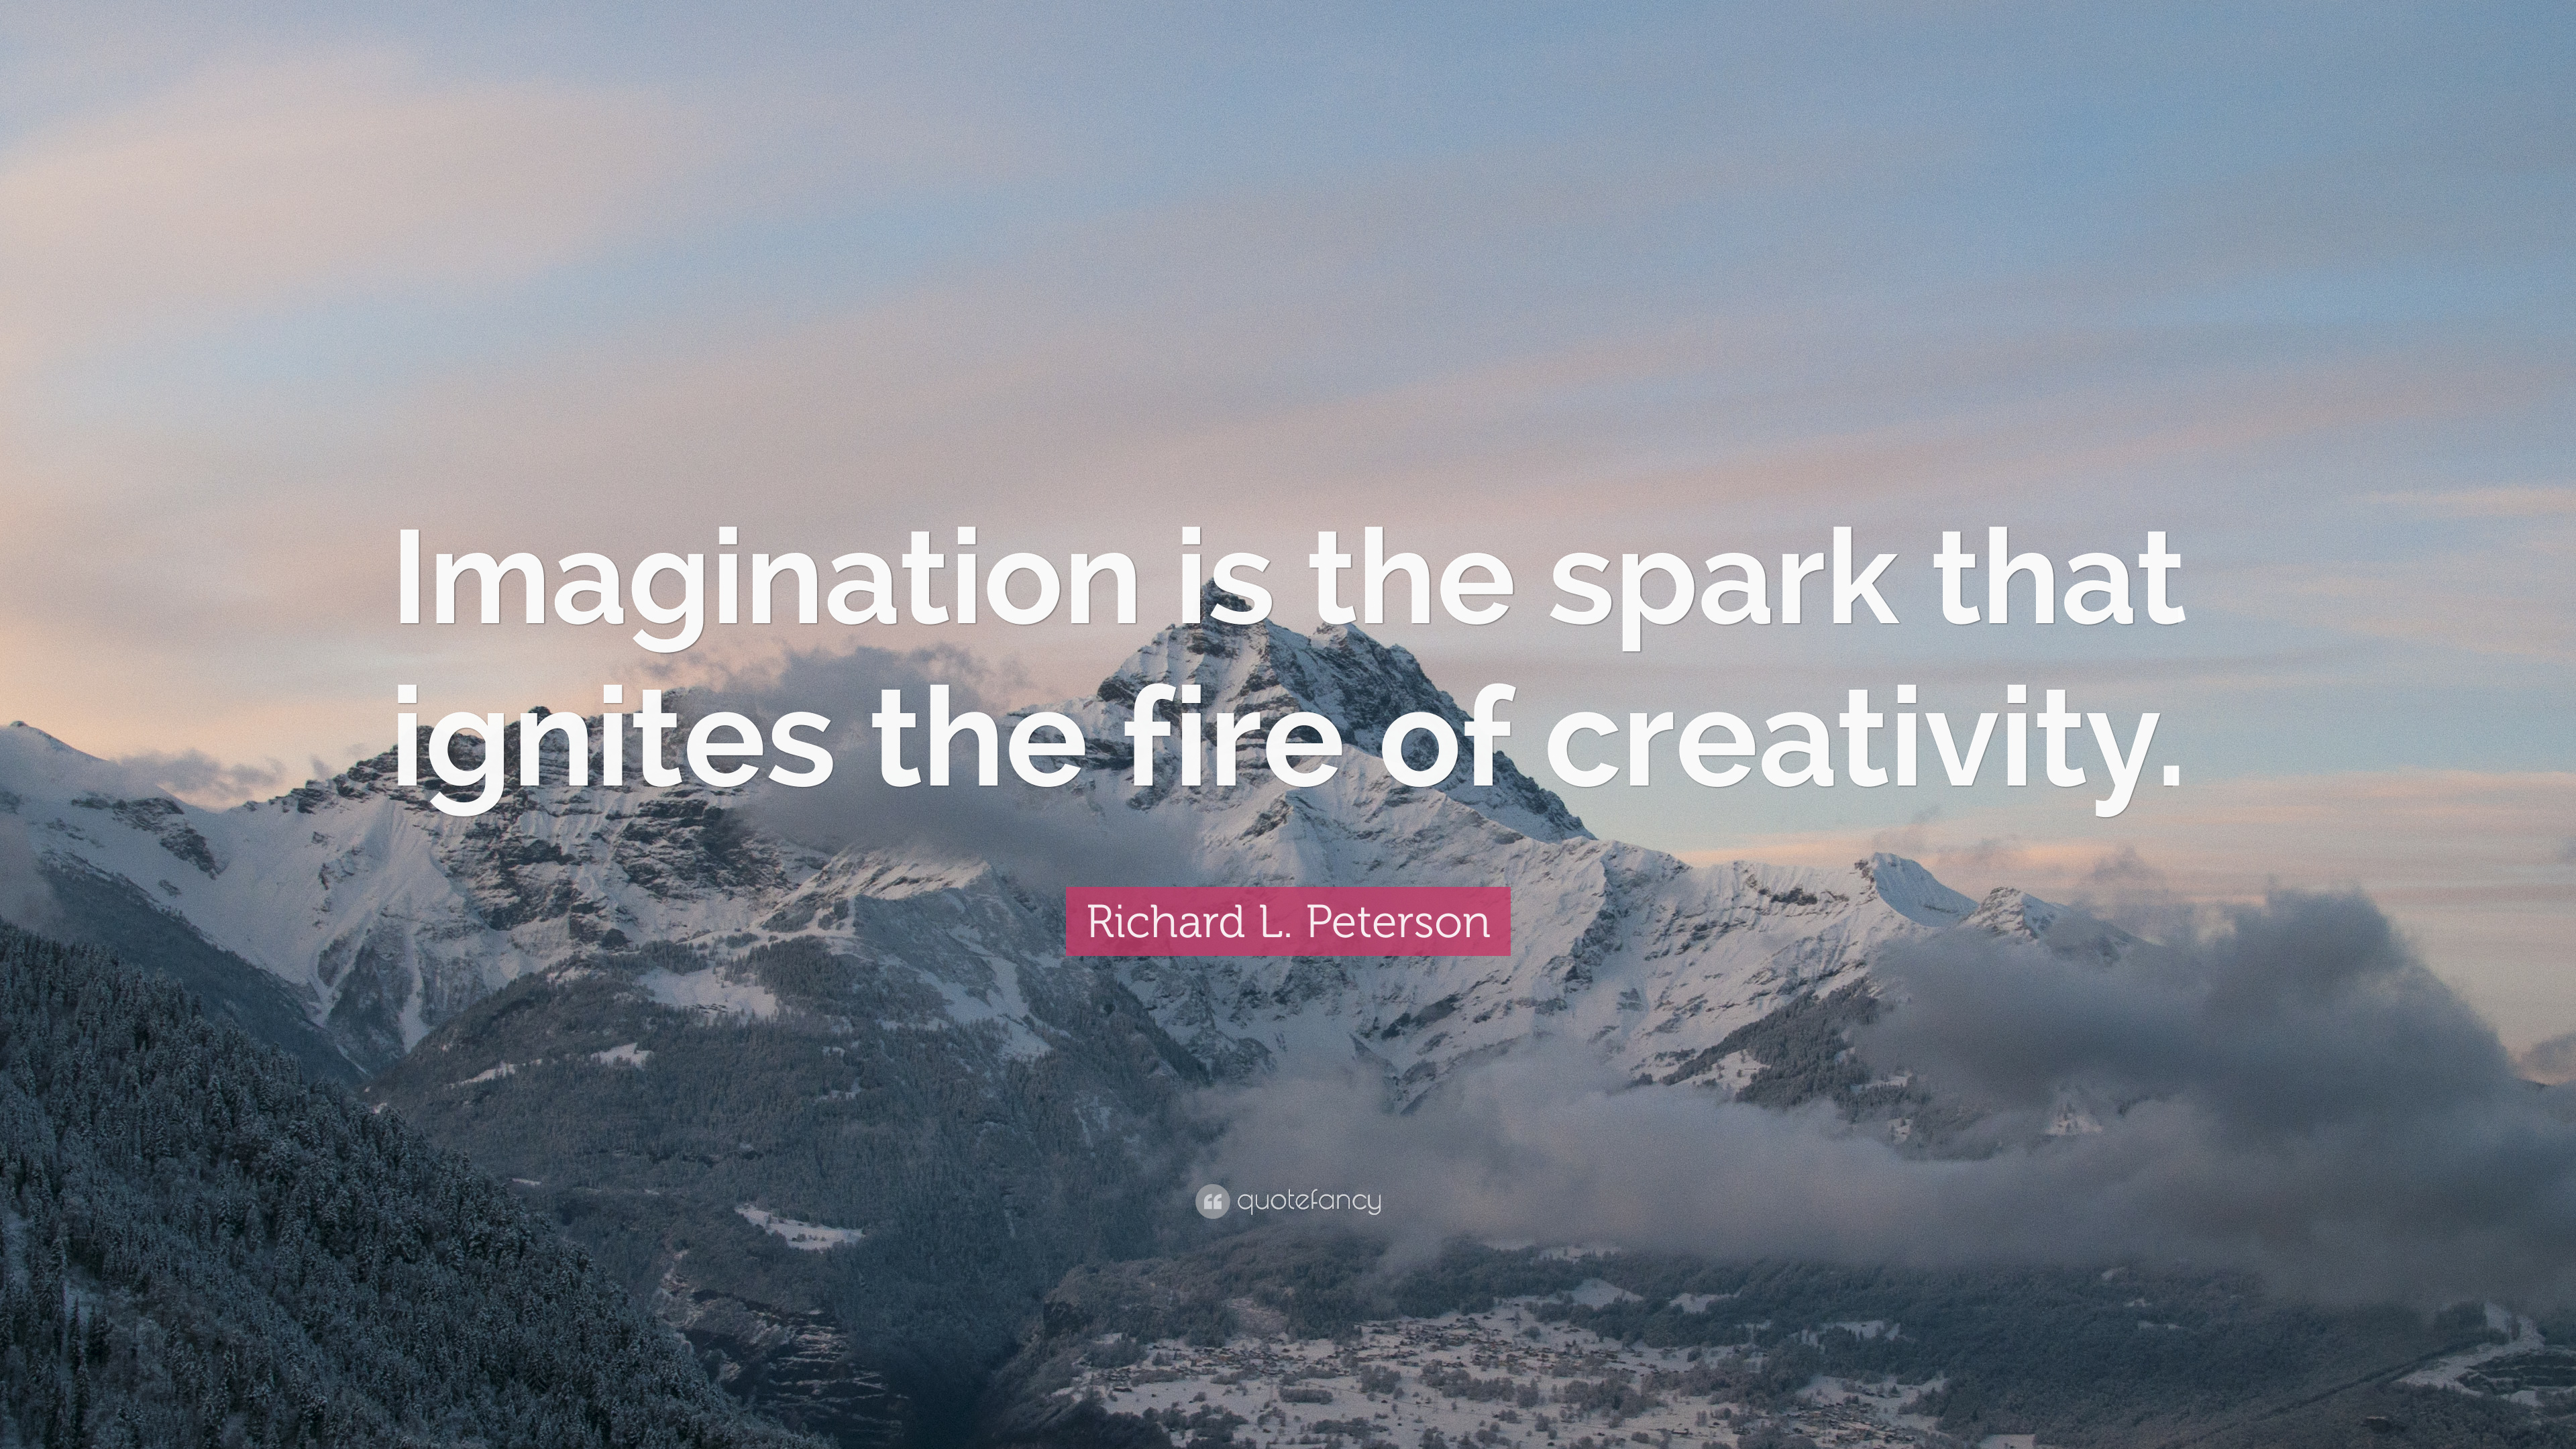 Inspiring the Imagination: Audiobook Quotes That Ignite Creative Sparks